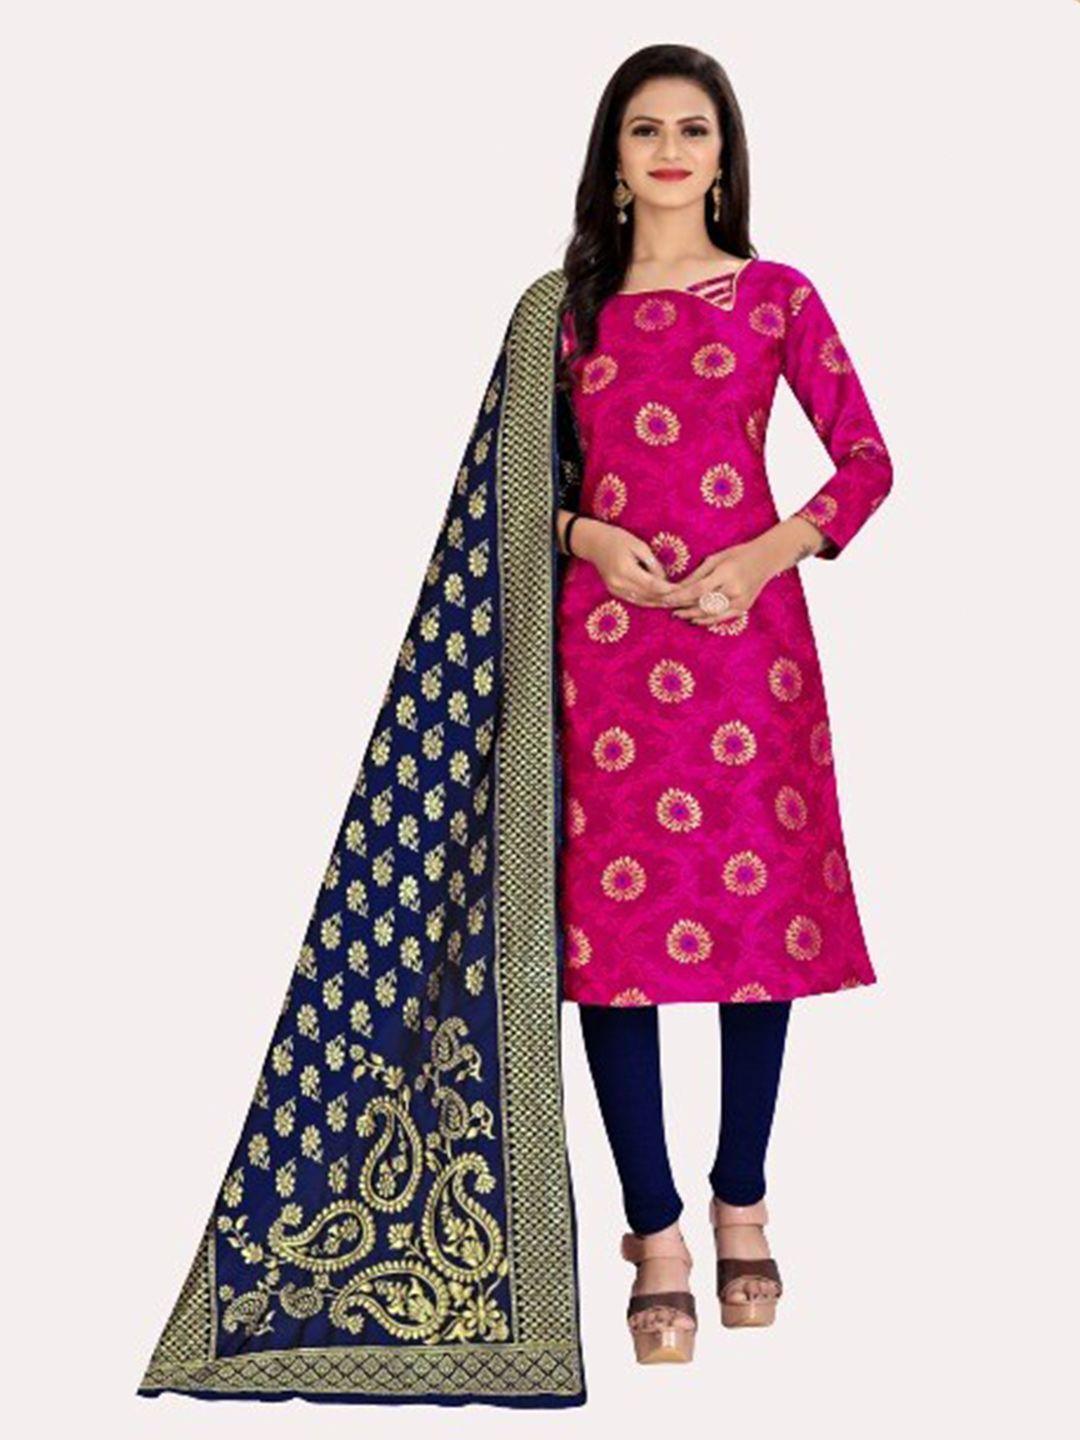 morly women pink & navy blue dupion silk unstitched dress material